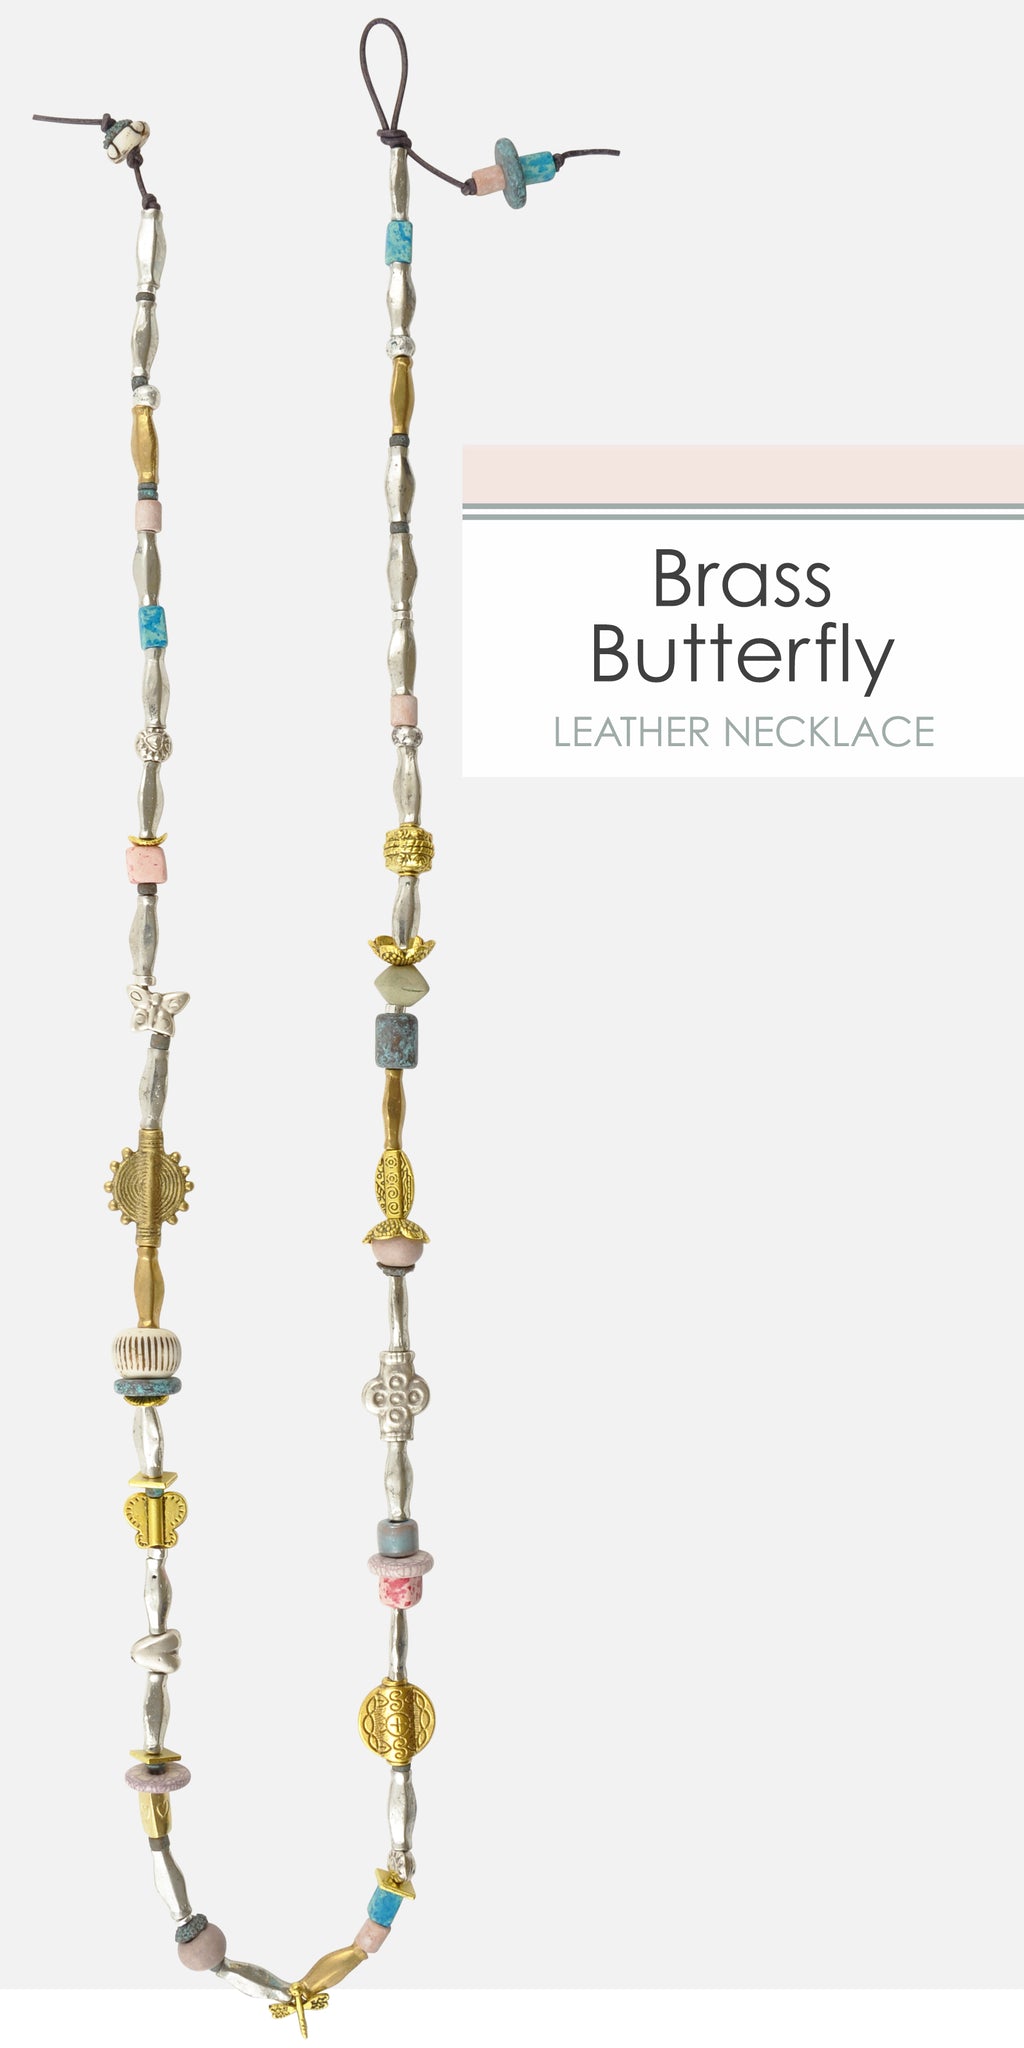 Brass Butterfly Silver Leather Necklace choiyeonhee